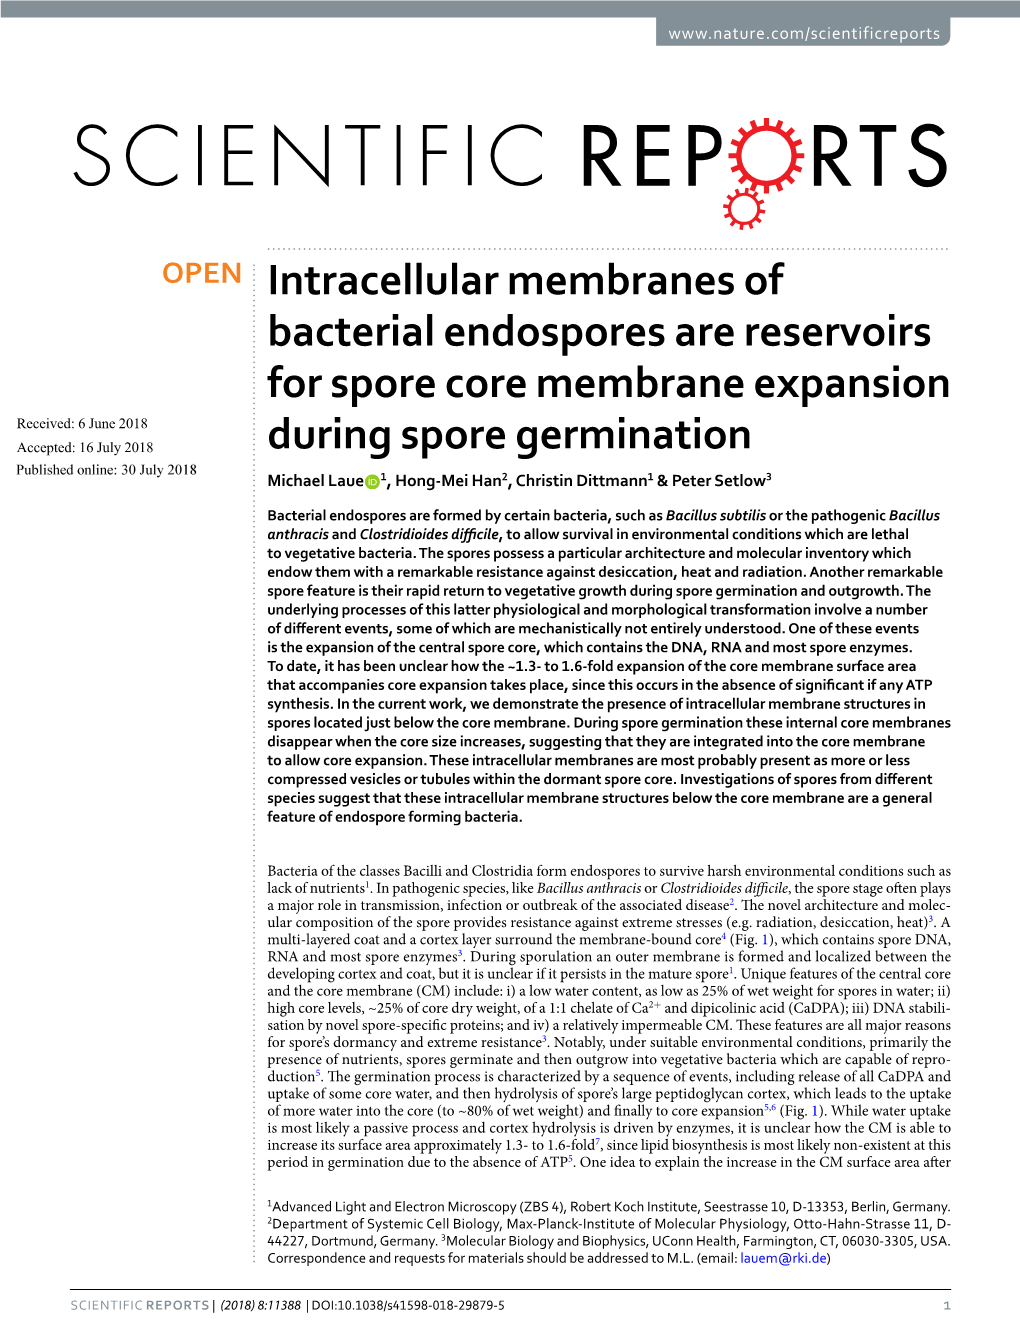 Intracellular Membranes of Bacterial Endospores Are Reservoirs for Spore